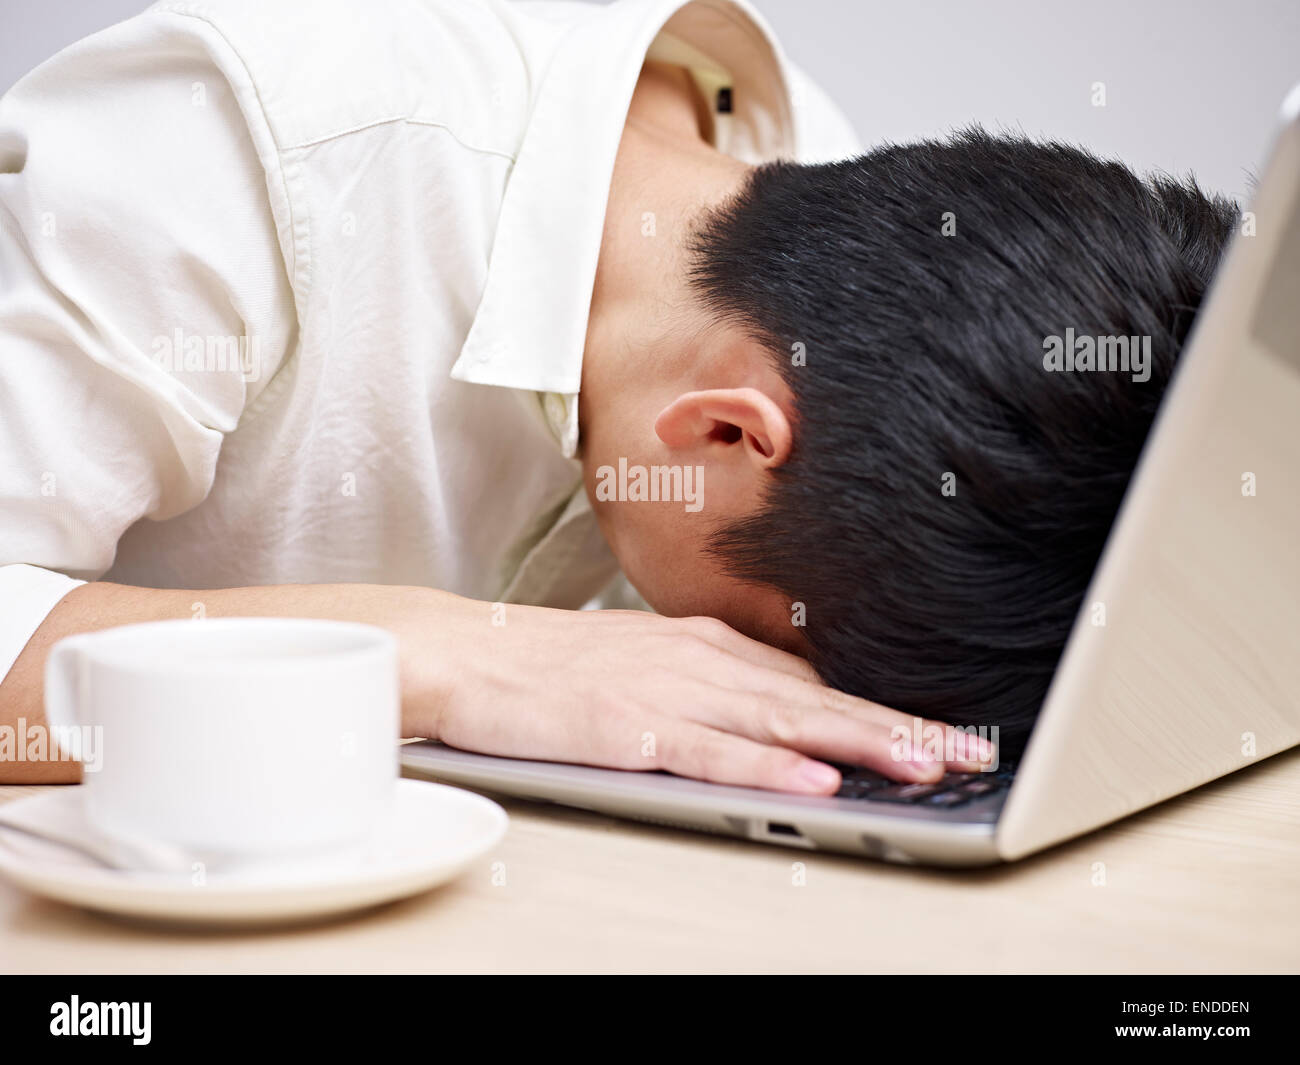 frustrated business person Stock Photo